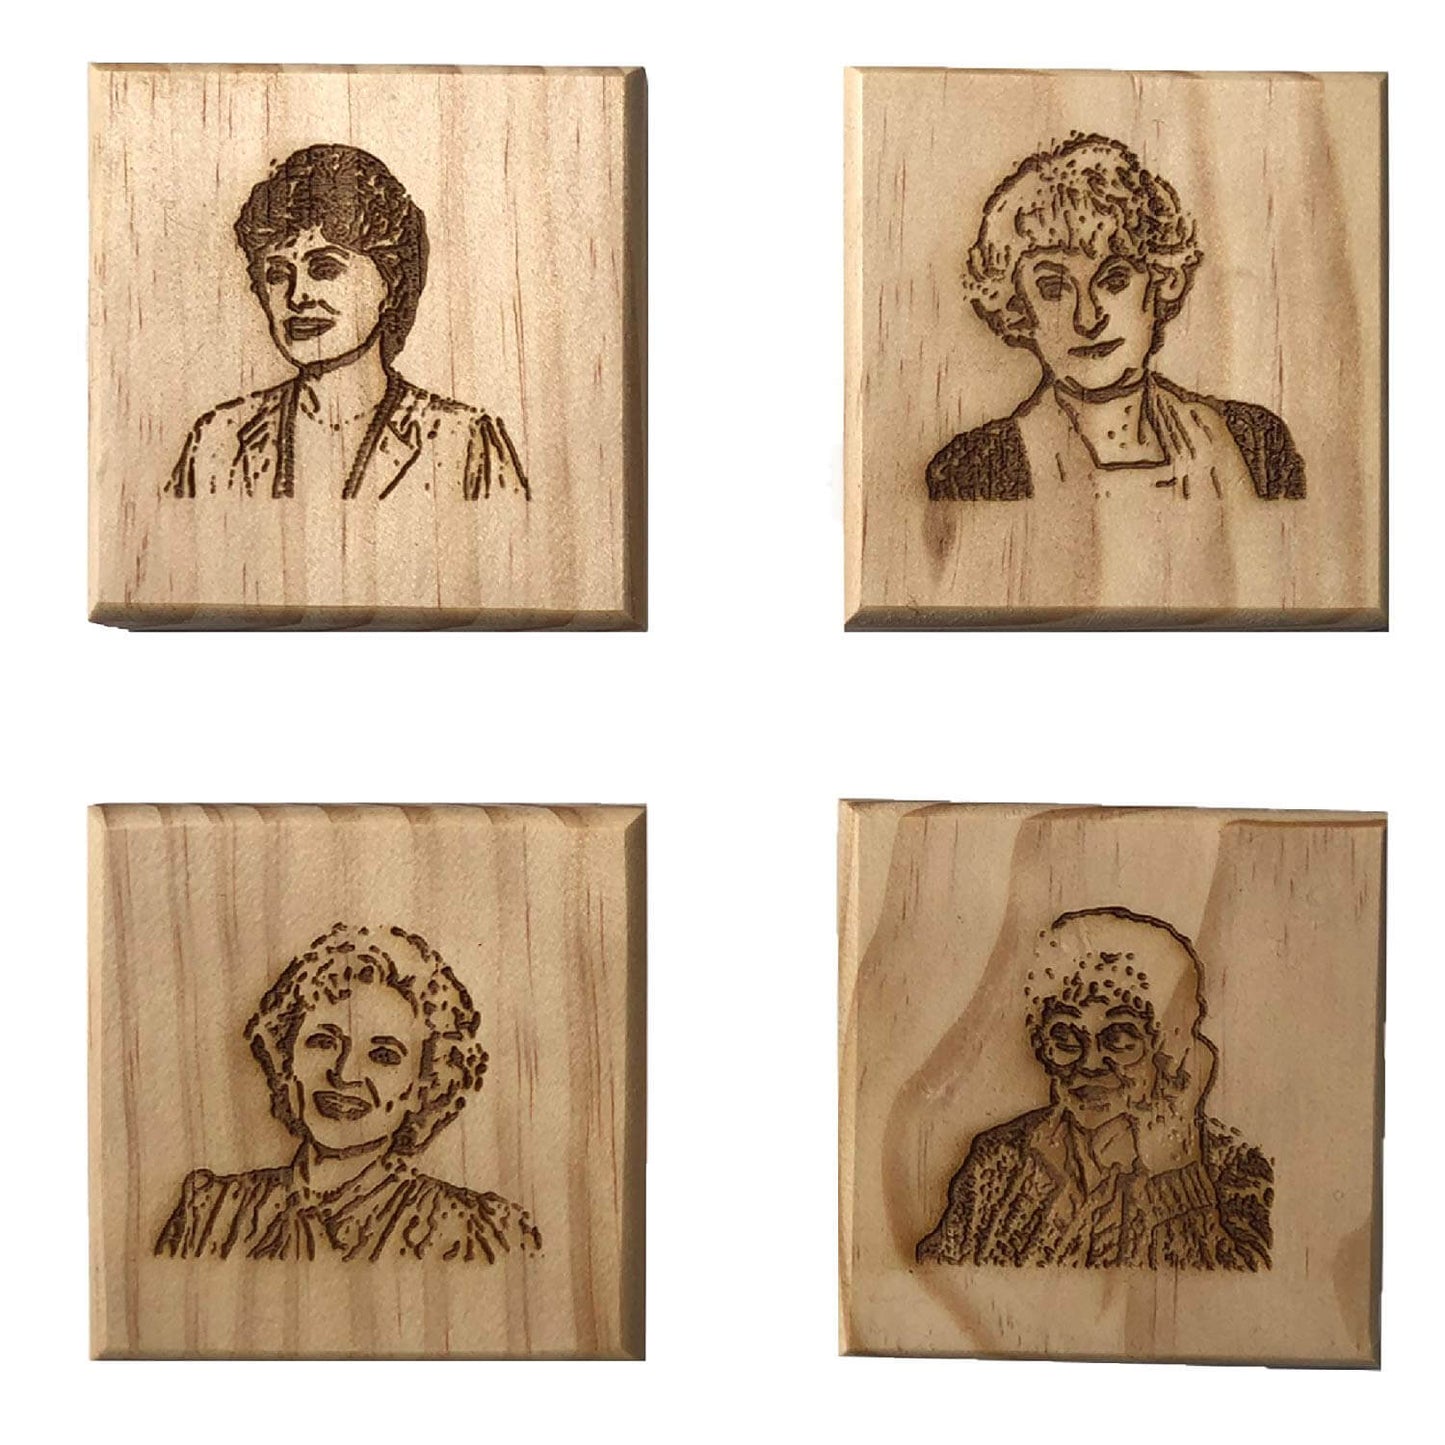 Golden Girls Coasters: Engraved Gift Set of 4 Coasters for Golden Girls Fan - Rose, Sophia, Blanche, Dorothy Silhouettes